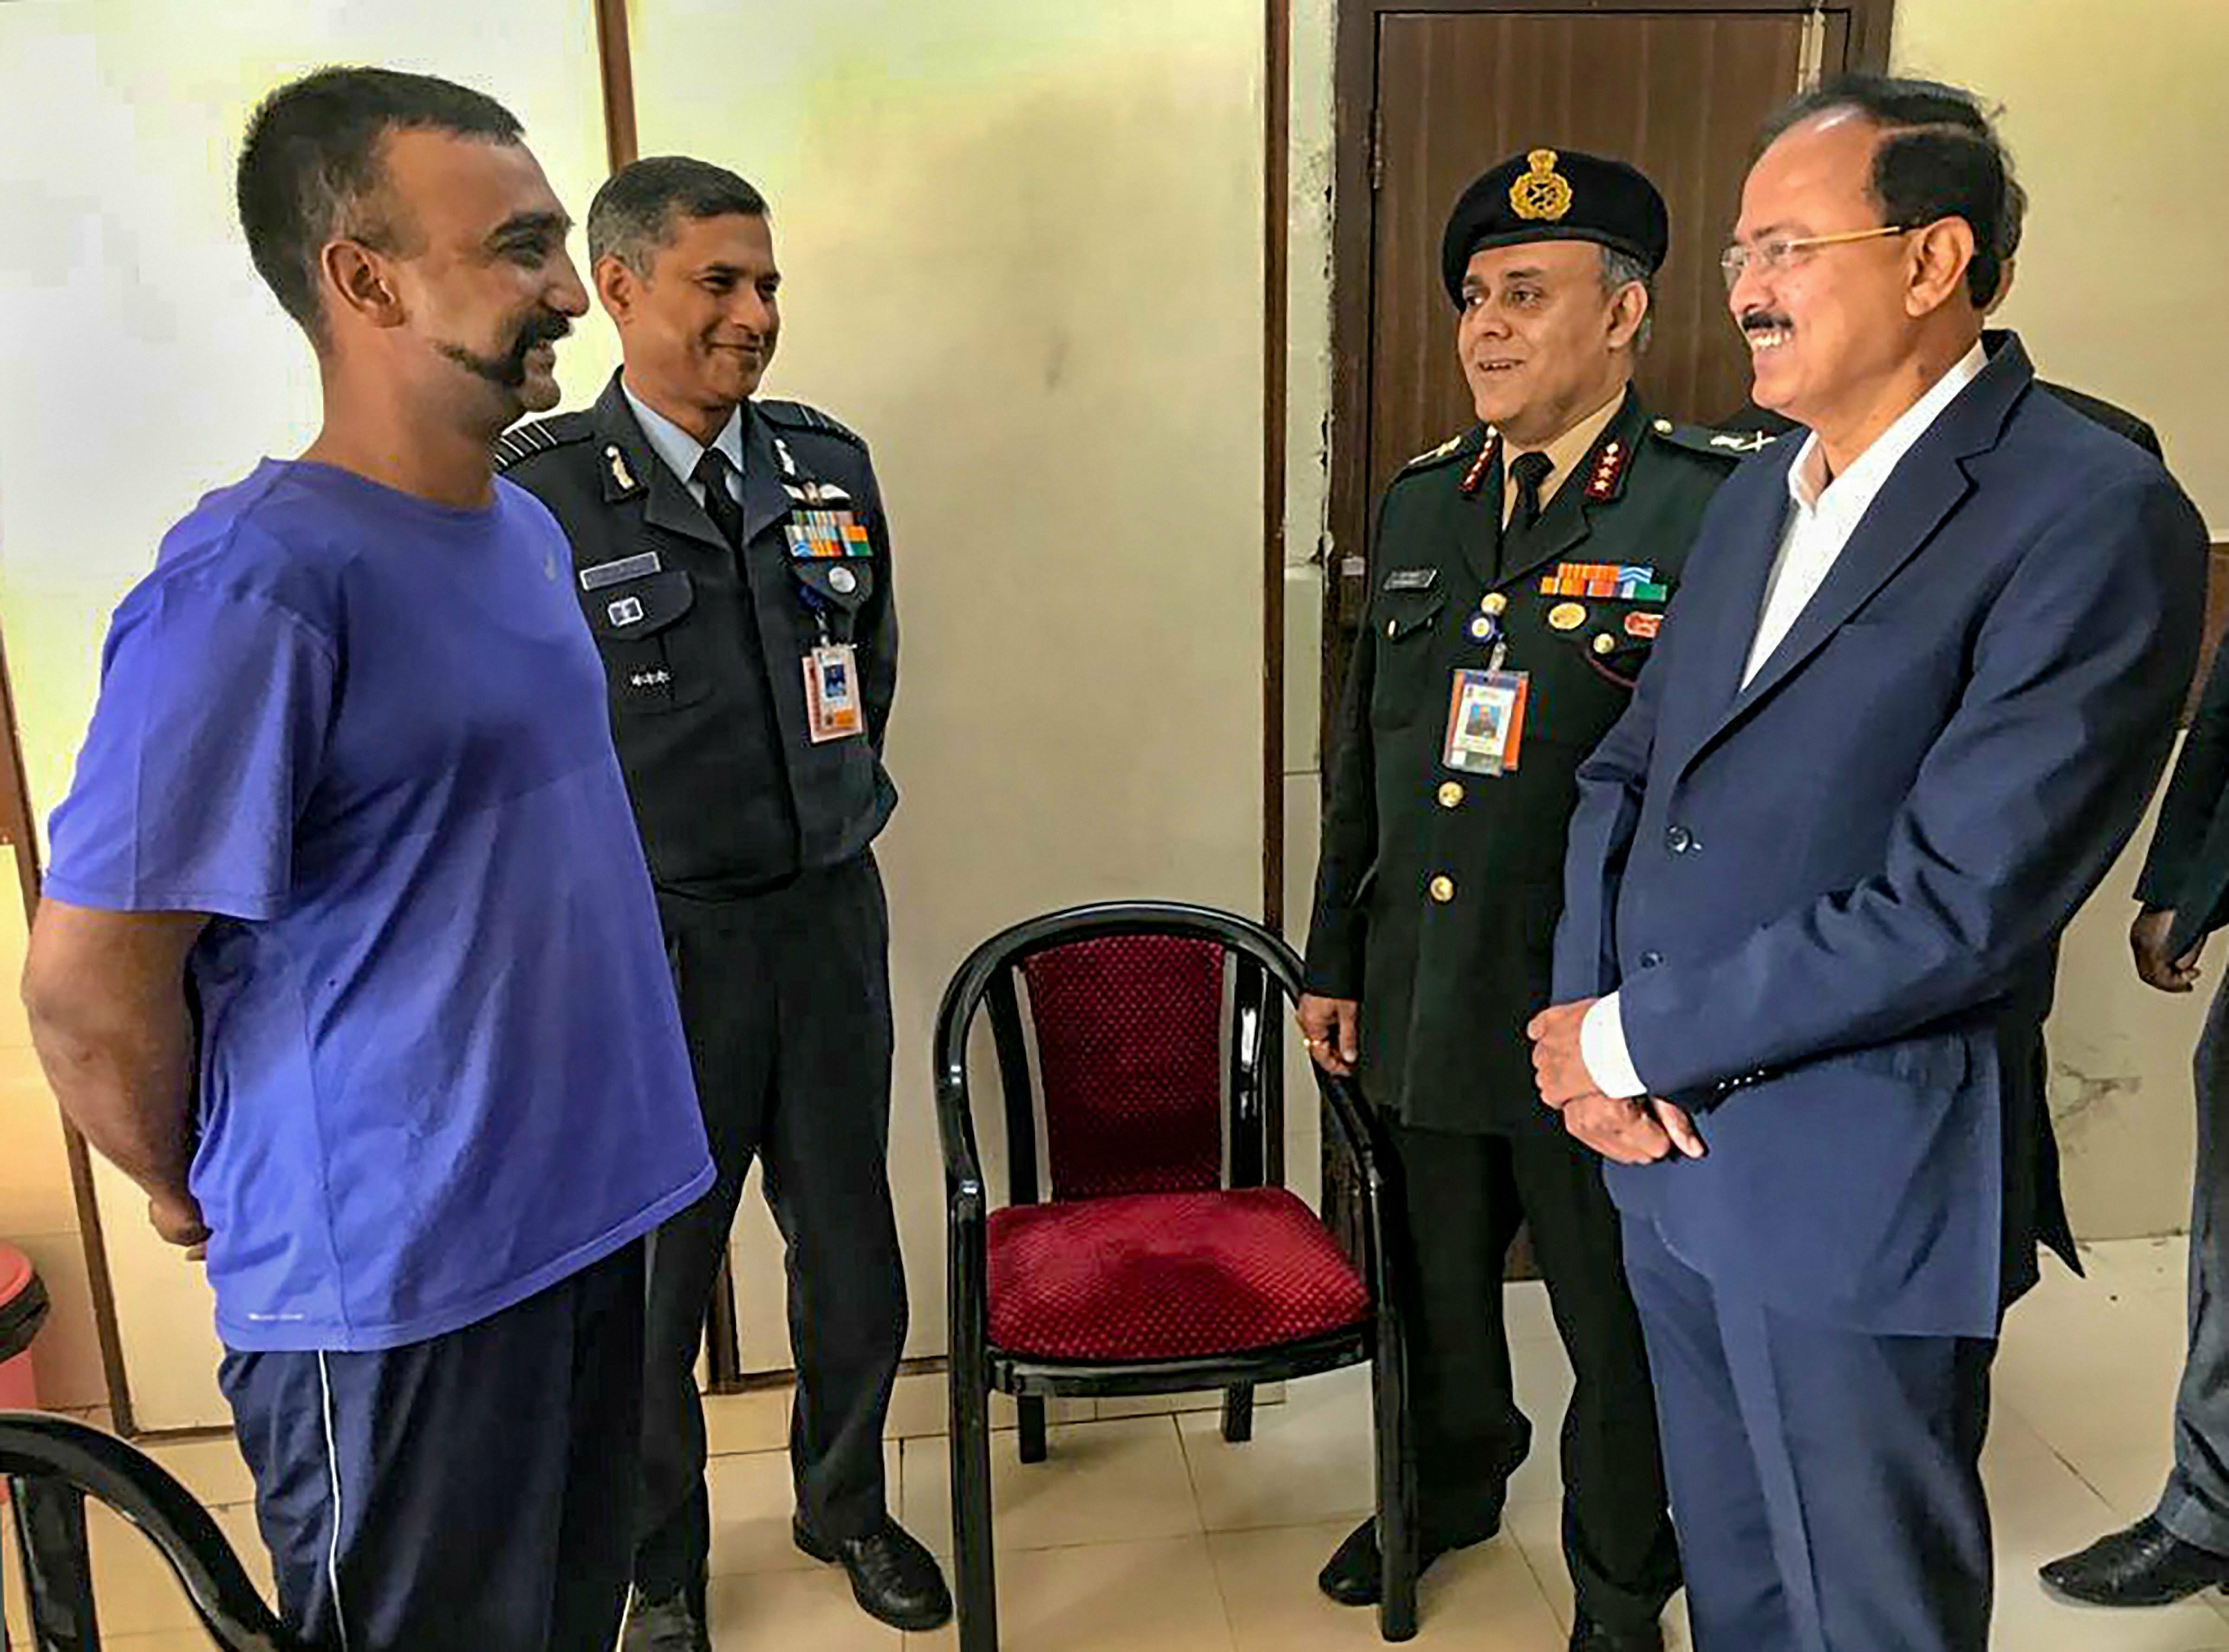 Minister of State for Defence Subhash Bhamre meets Indian Air Force (IAF) Wing Commander Abhinandan Varthaman at Research and Referral Hospital in New Delhi Cantonment in New Delhi - PTI